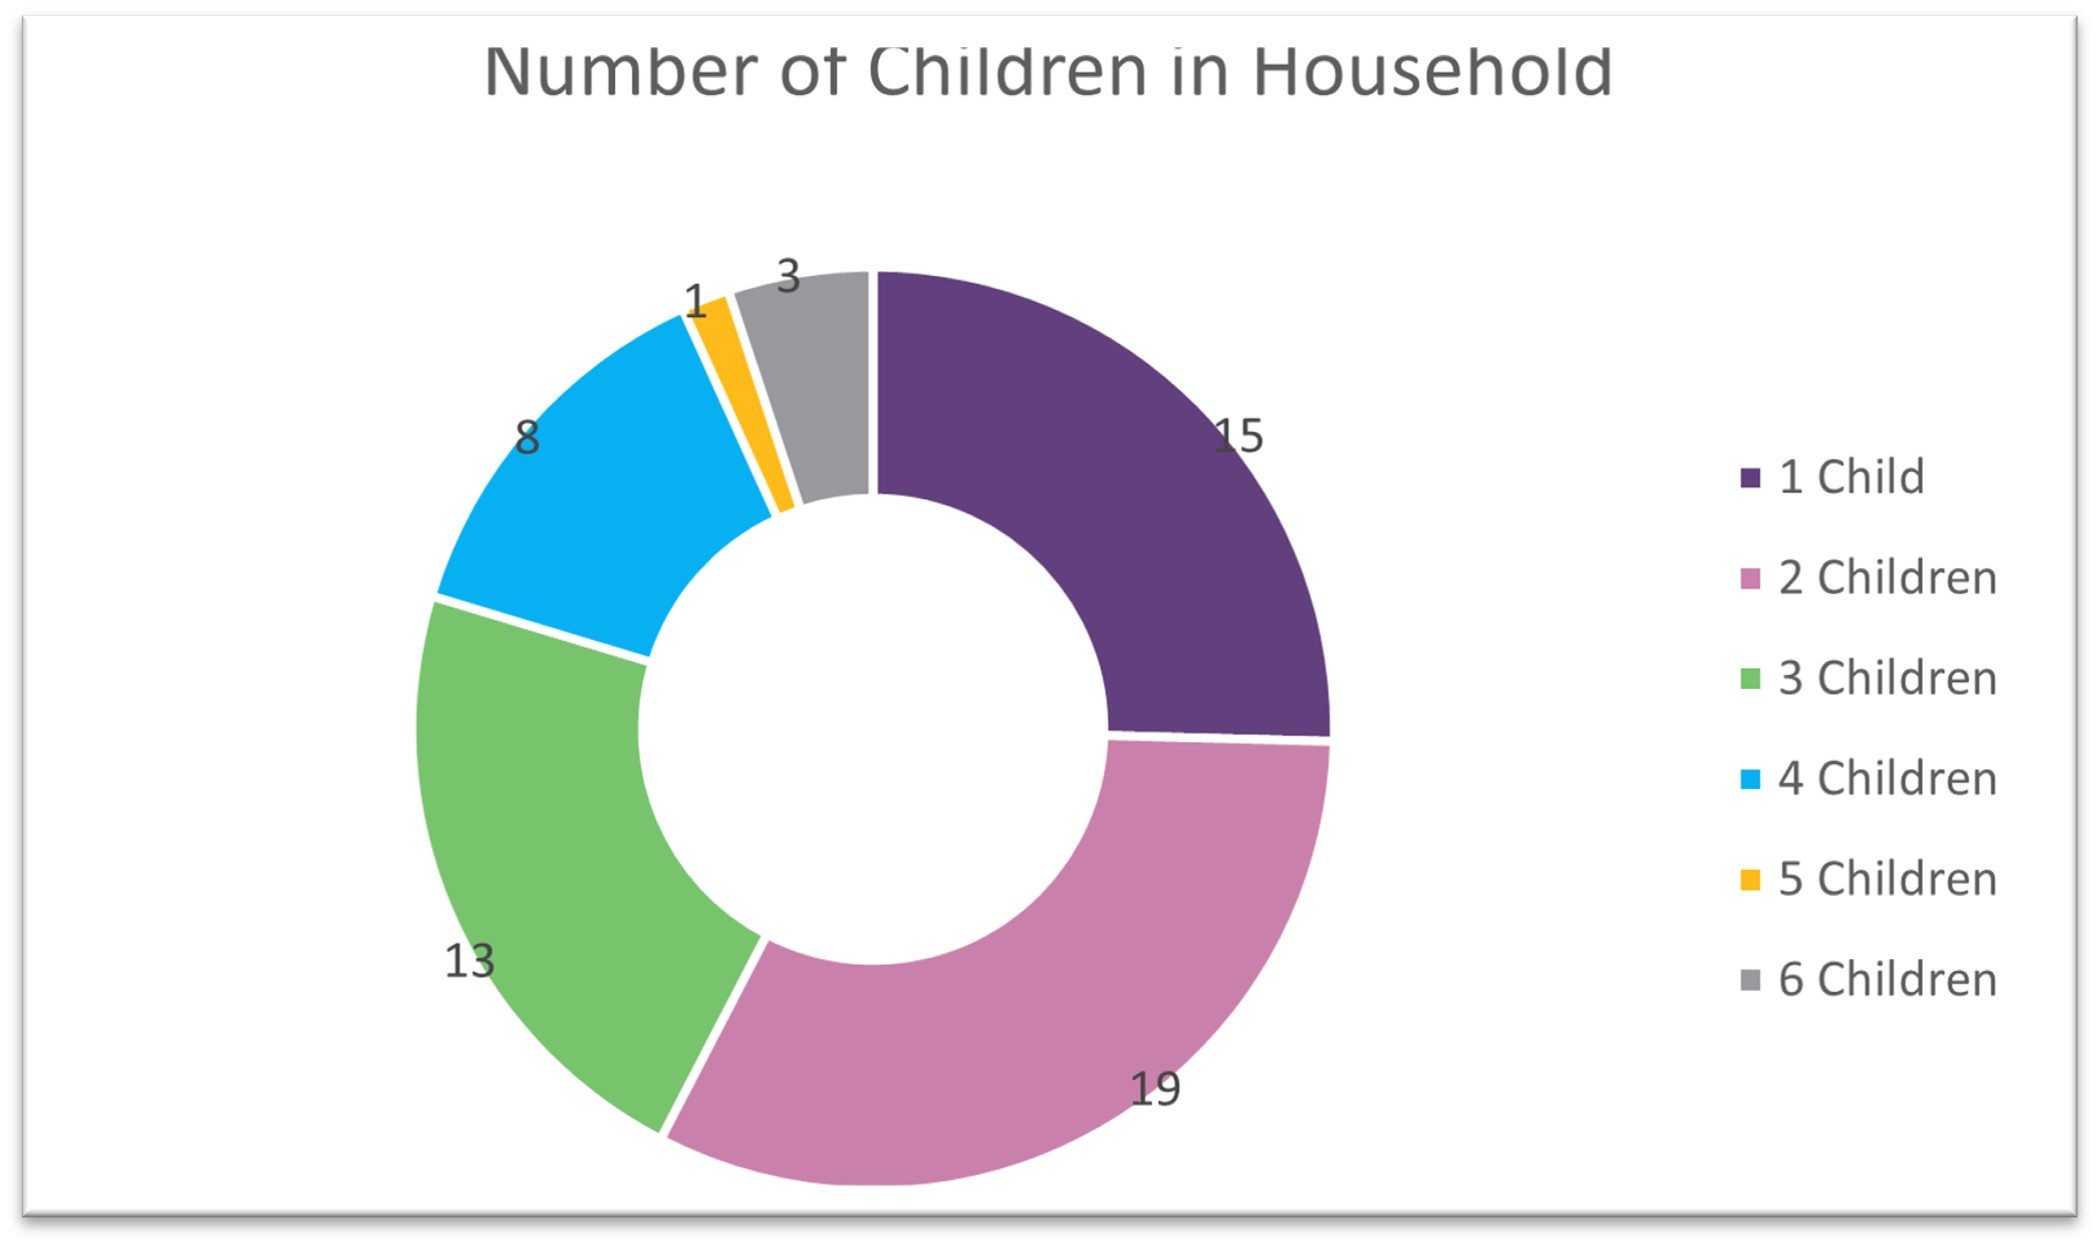 Pie chart showing the number of children in the household across the Intervention Group. 58 per cent of families have 1 or 2 children in the household. 